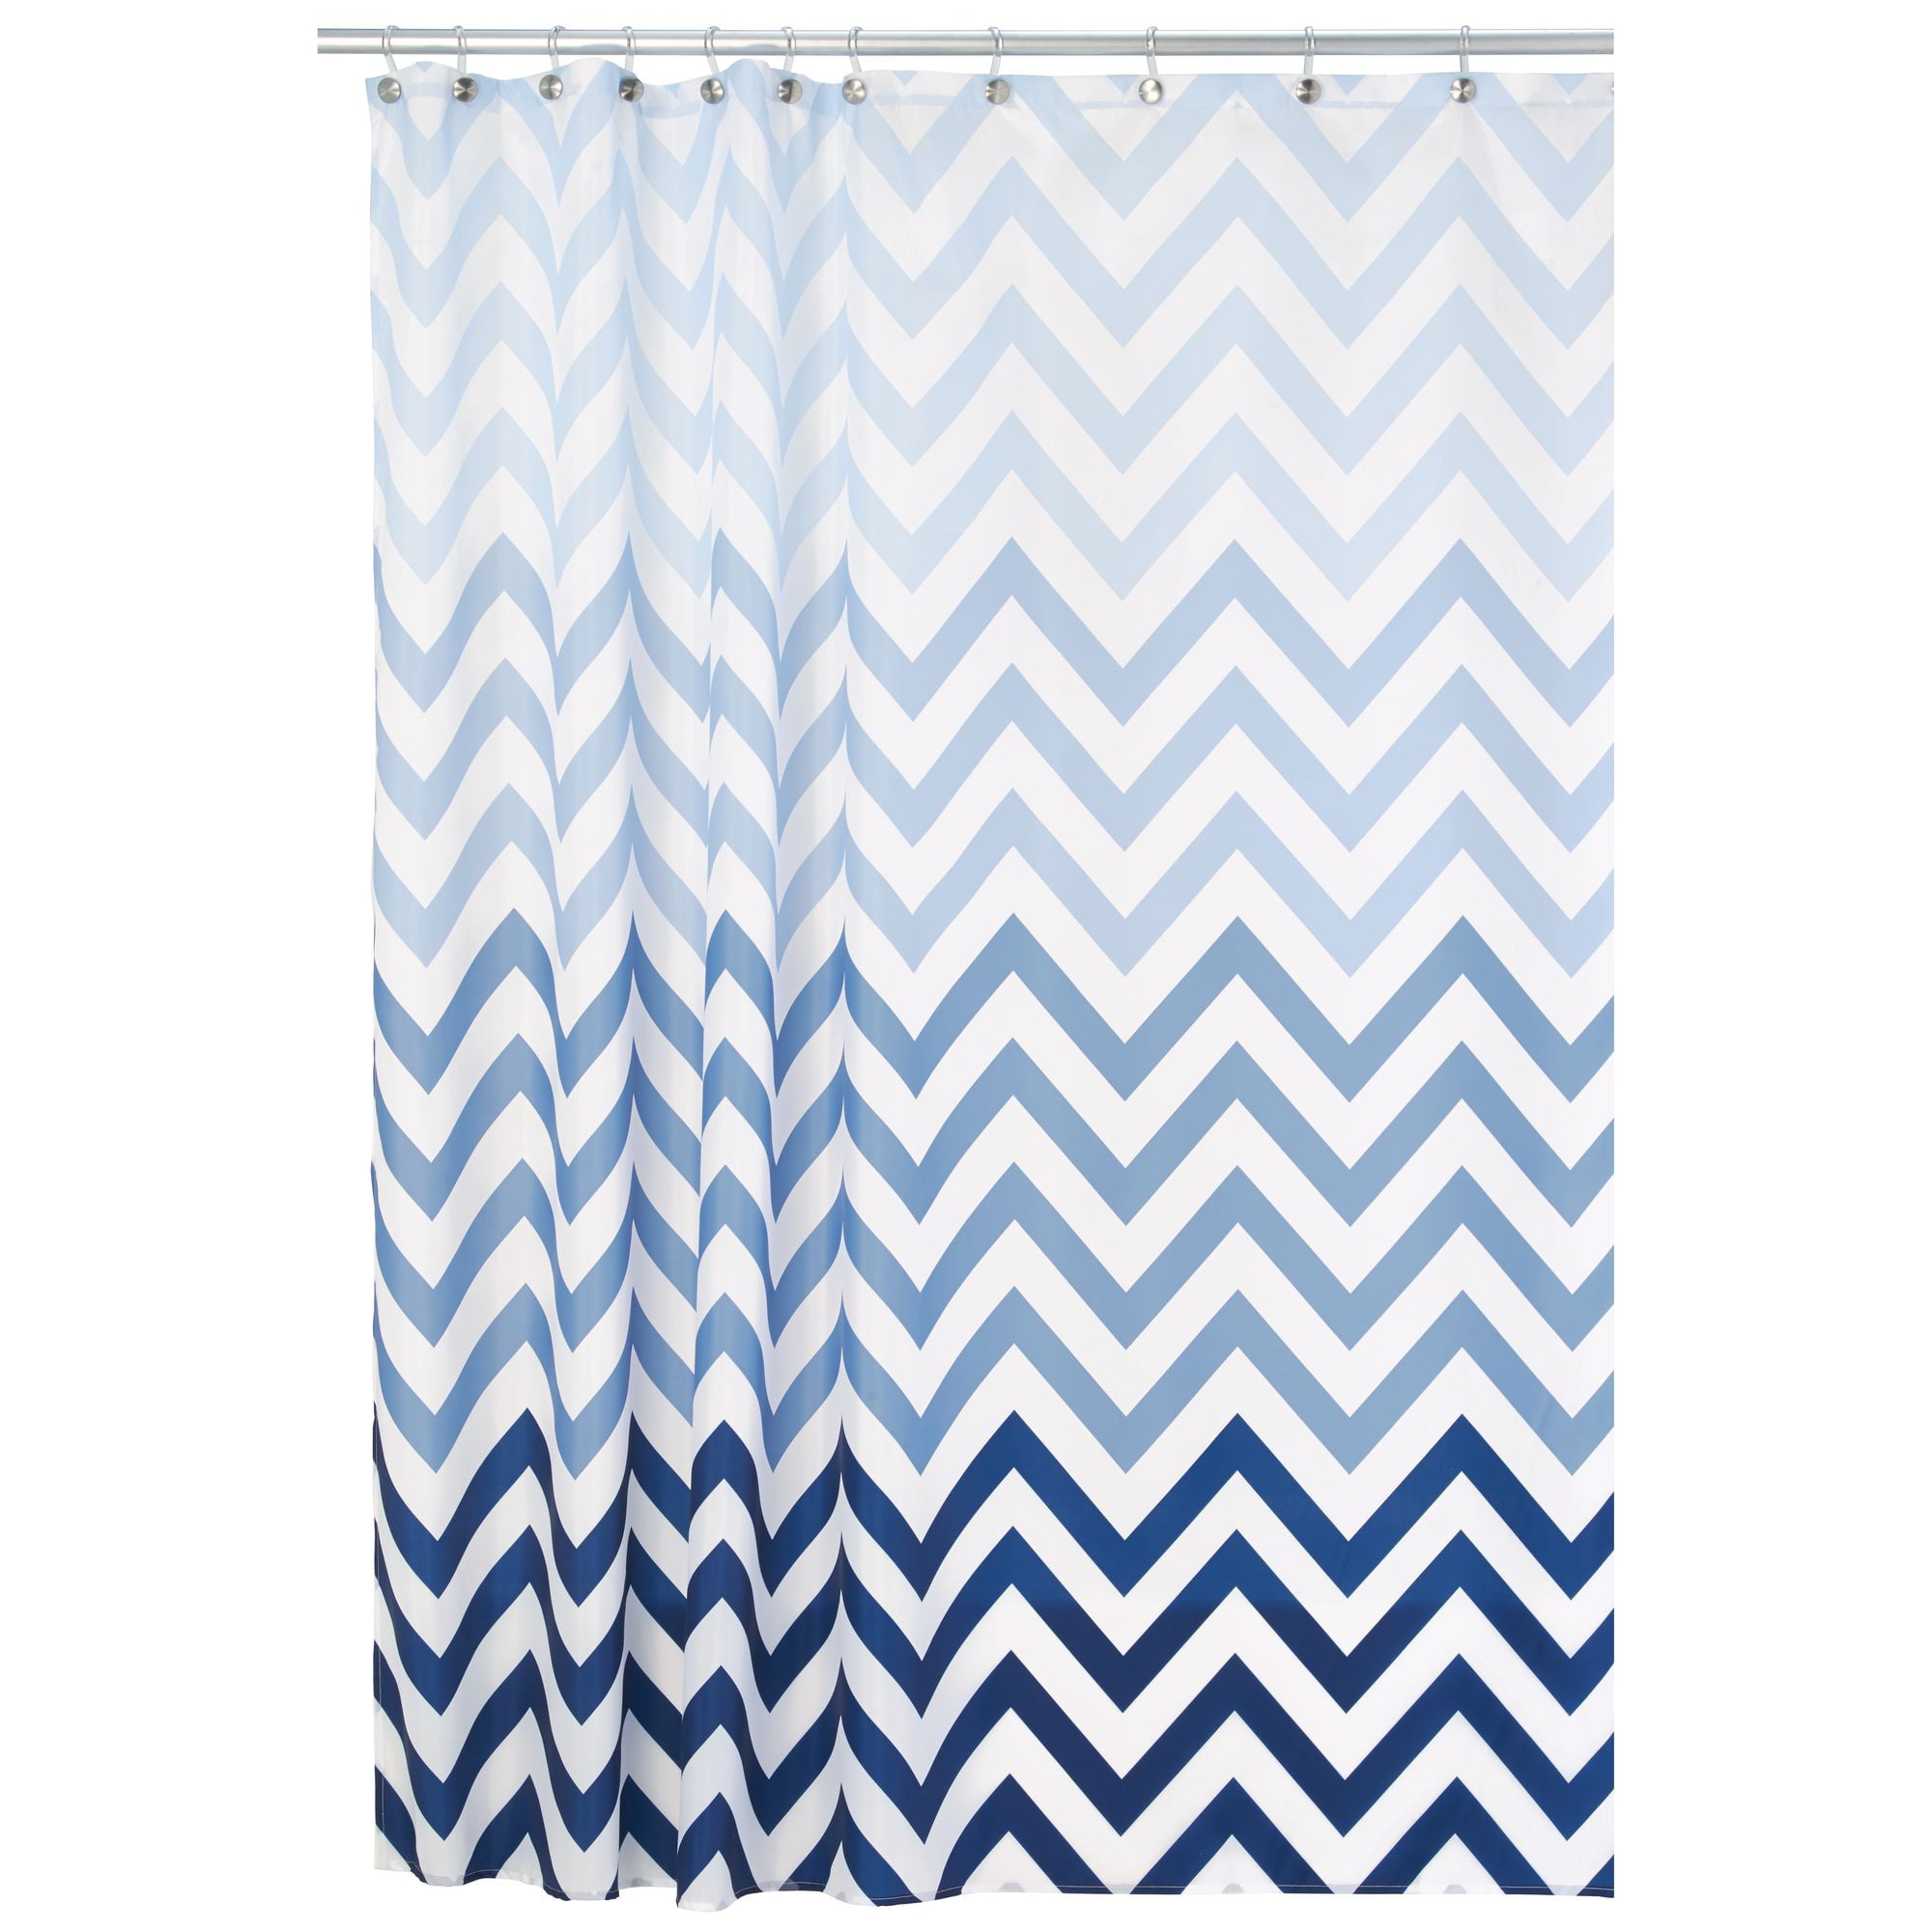 Fabric Shower Curtain Ombre Zig Zag Chevron Print with Reinforced Grommet SC-02 